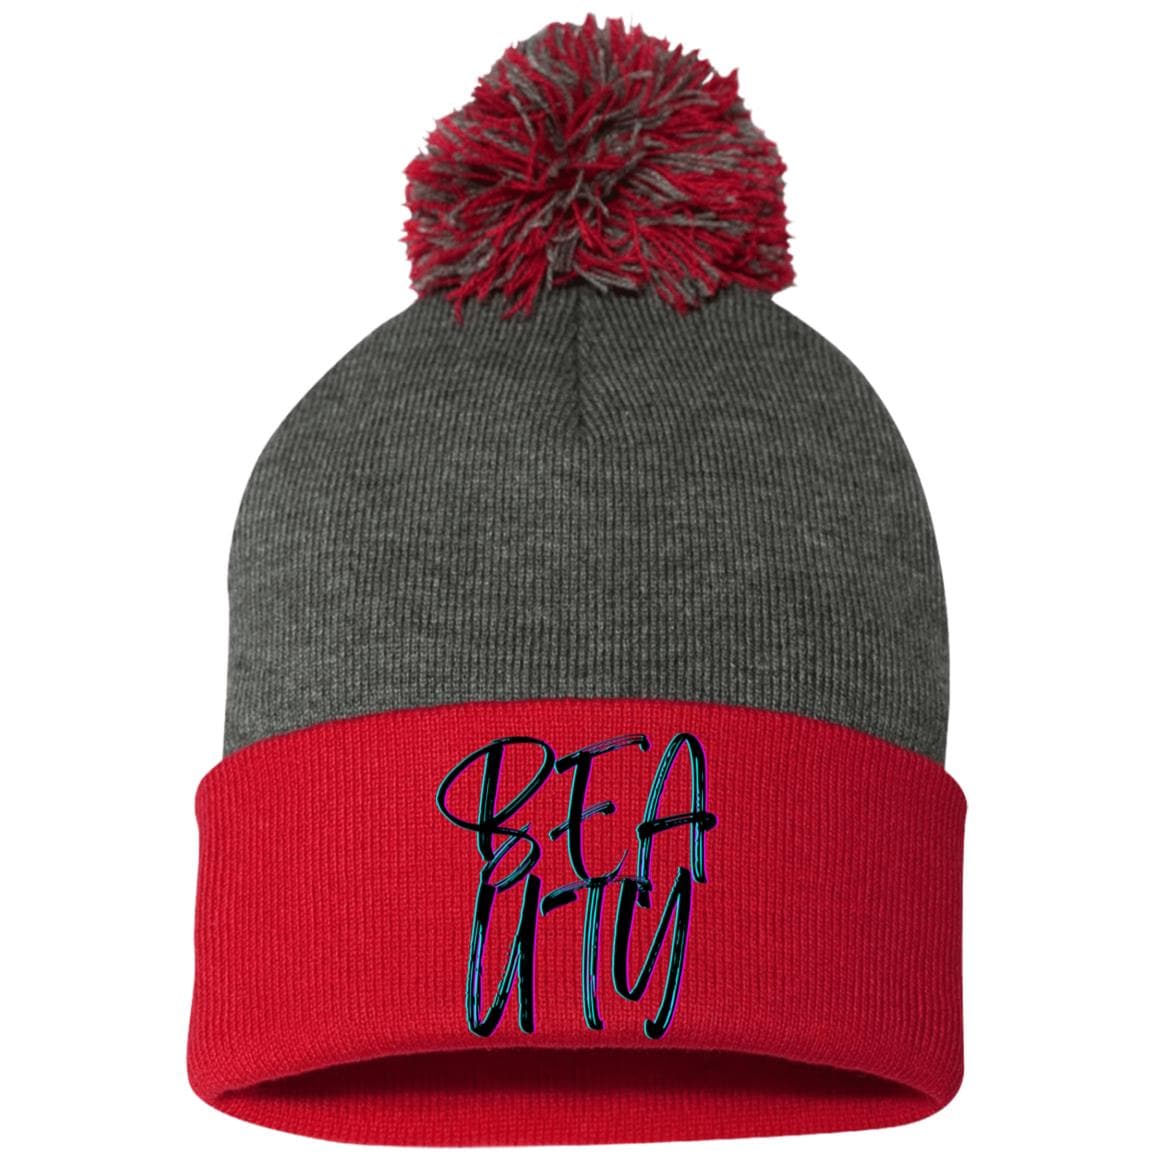 Red Dark Heather One Size - Beauty Embroidered Pom Pom Knit Cap - Hats at TFC&H Co.